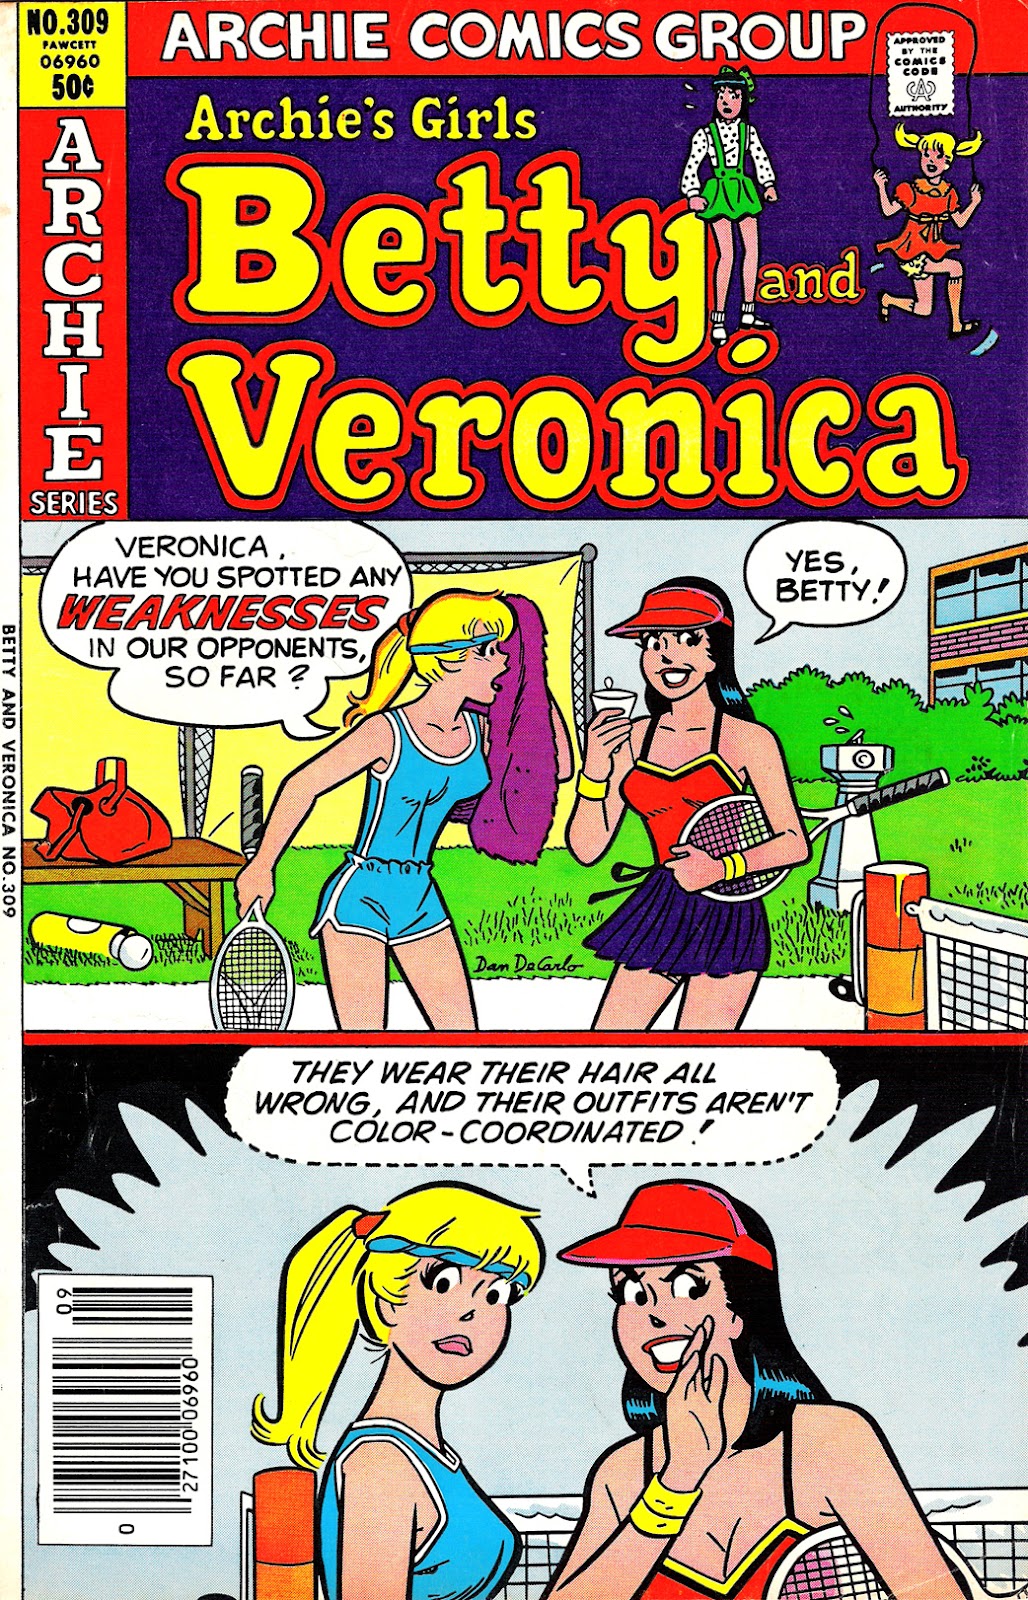 Archie's Girls Betty and Veronica 309 Page 1